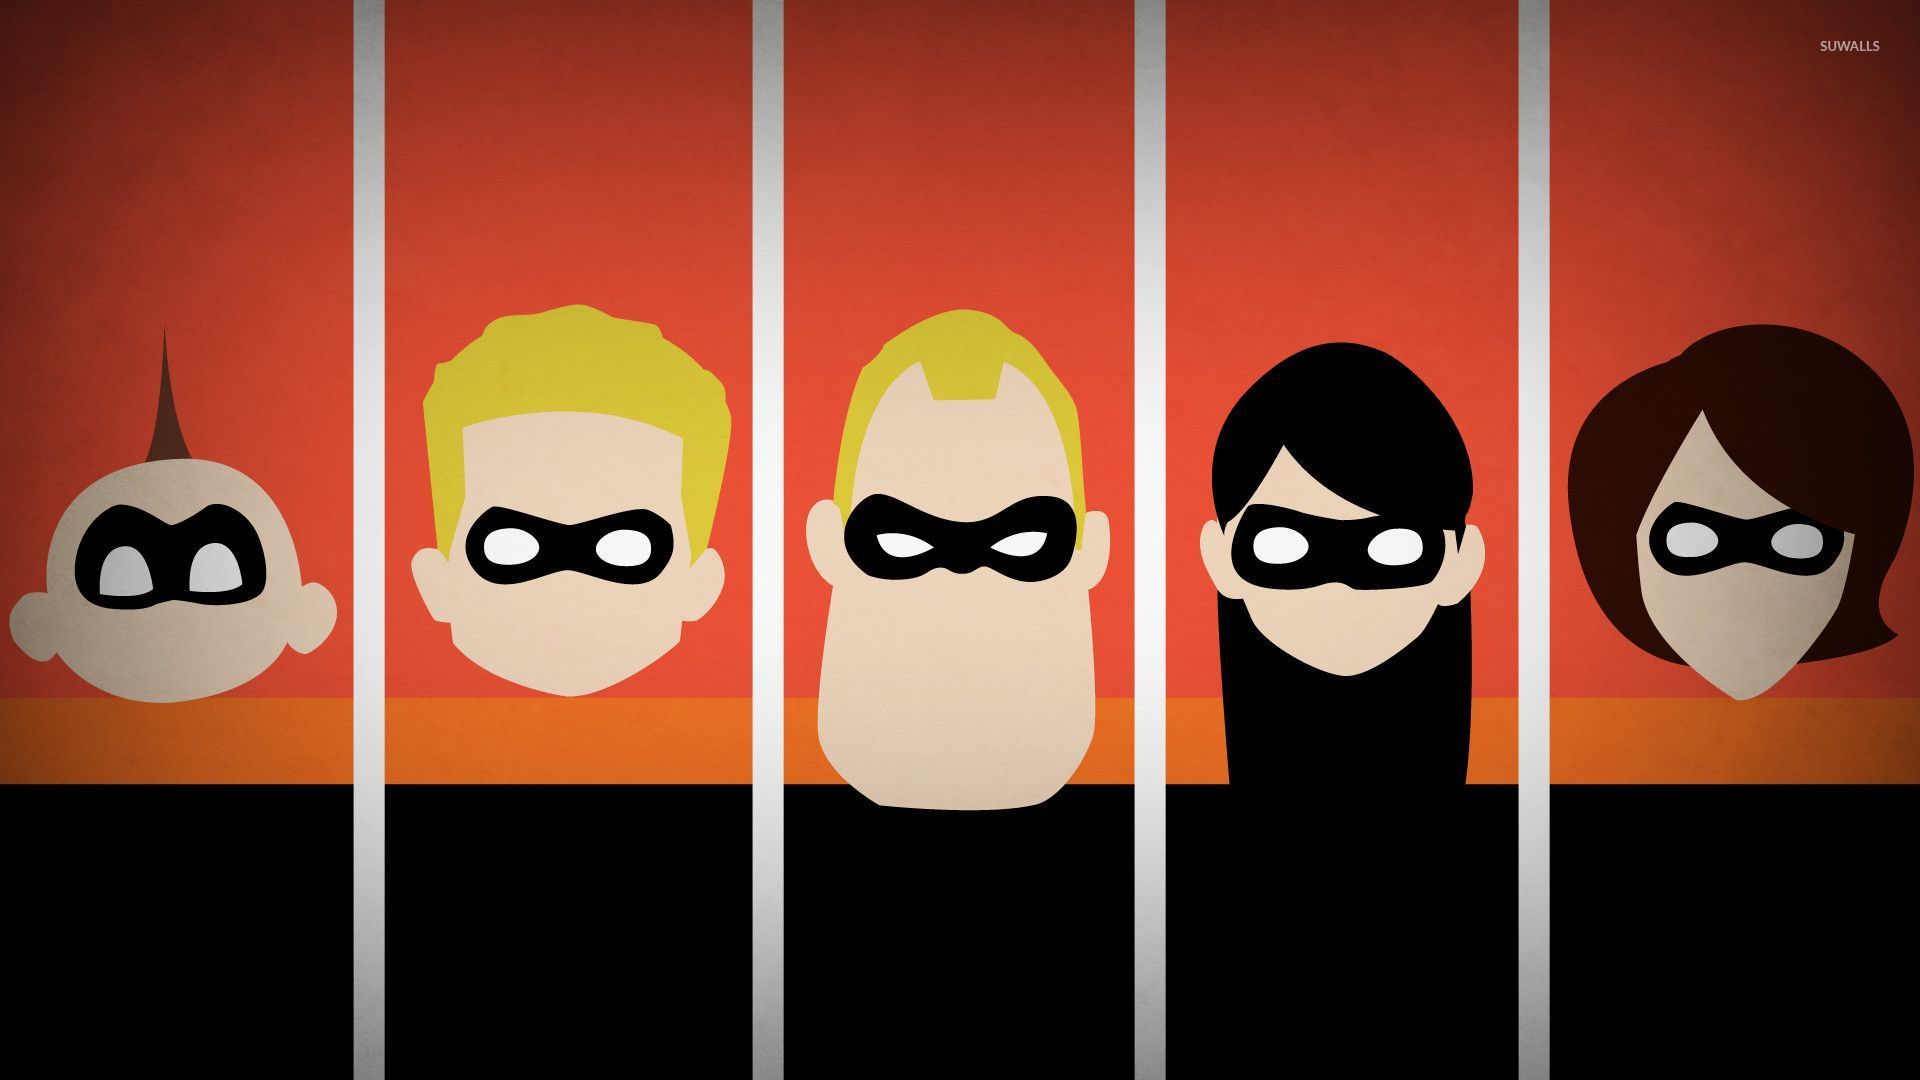 THE INCREDIBLES wallpaper  1920x1080  102897  WallpaperUP